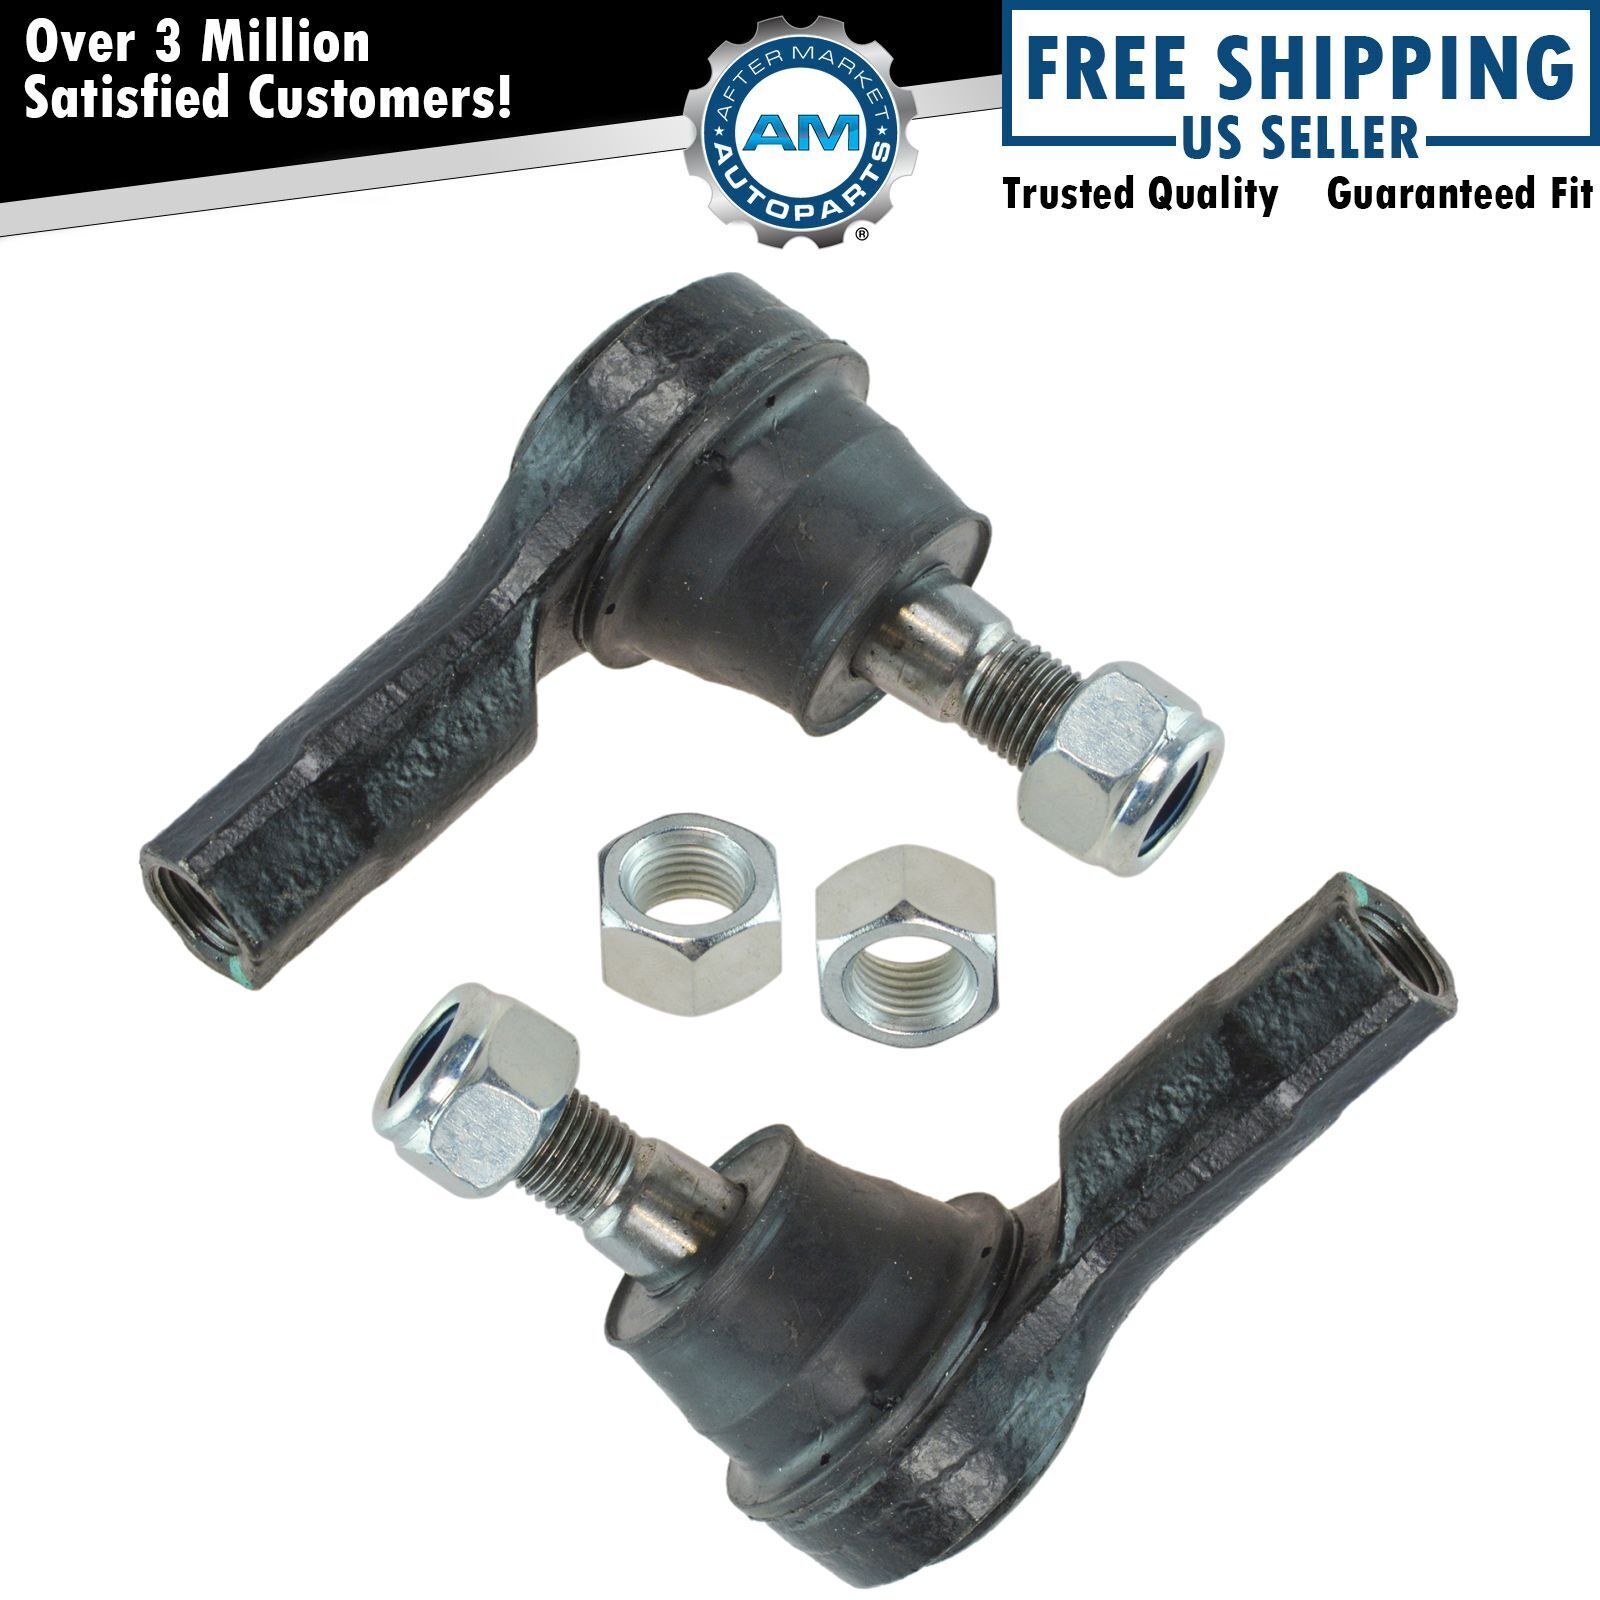 Front Outer Steering Tie Rods Ends LH & RH Side Kit Pair Set of 2 for Aspire Rio